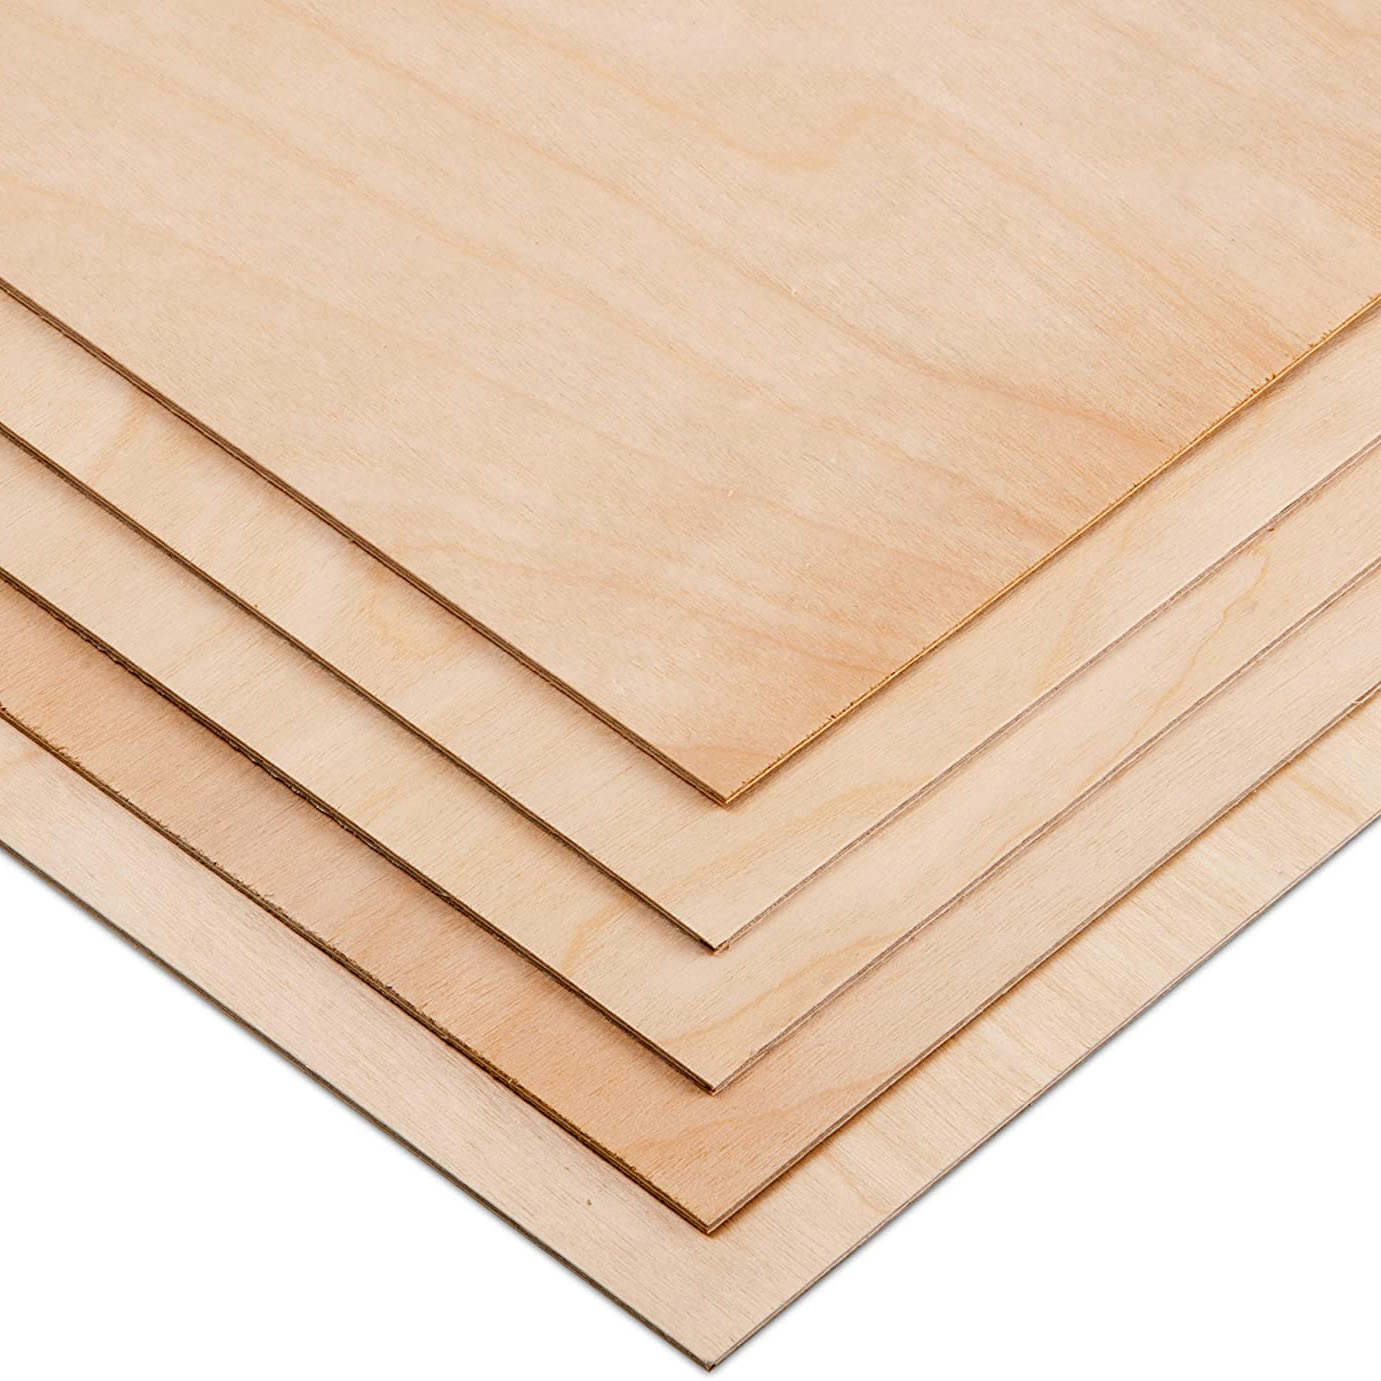 Craft Plywood Sheets 12″ X 48″ X 1 8″ Bnm The Ink Stone